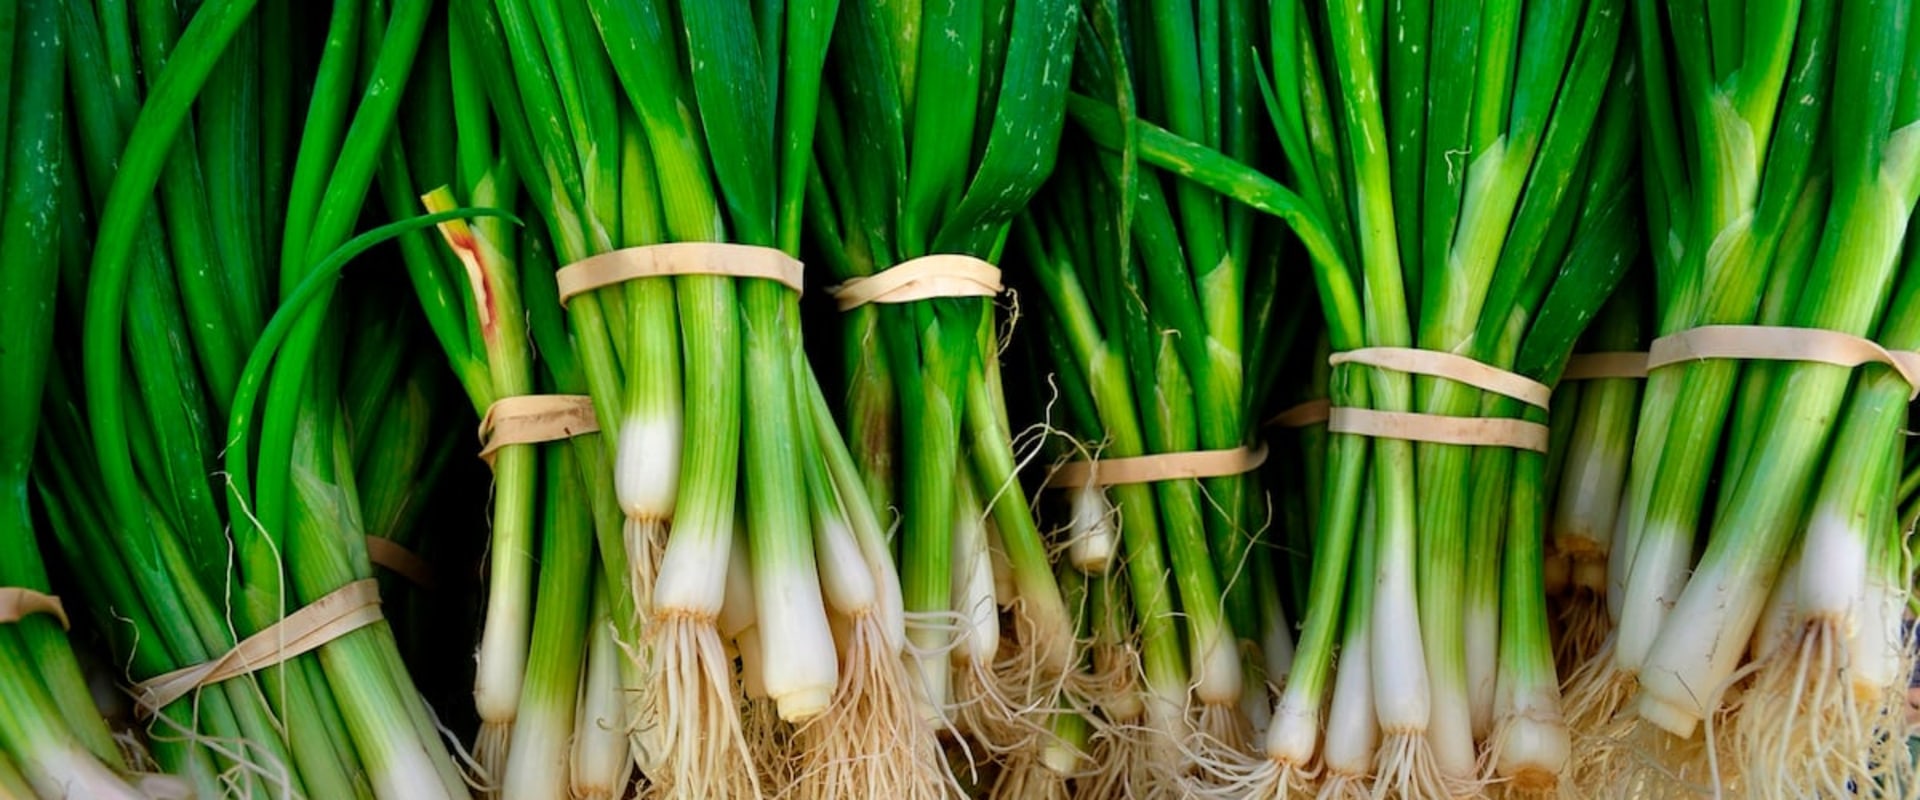 Scallions: An Overview